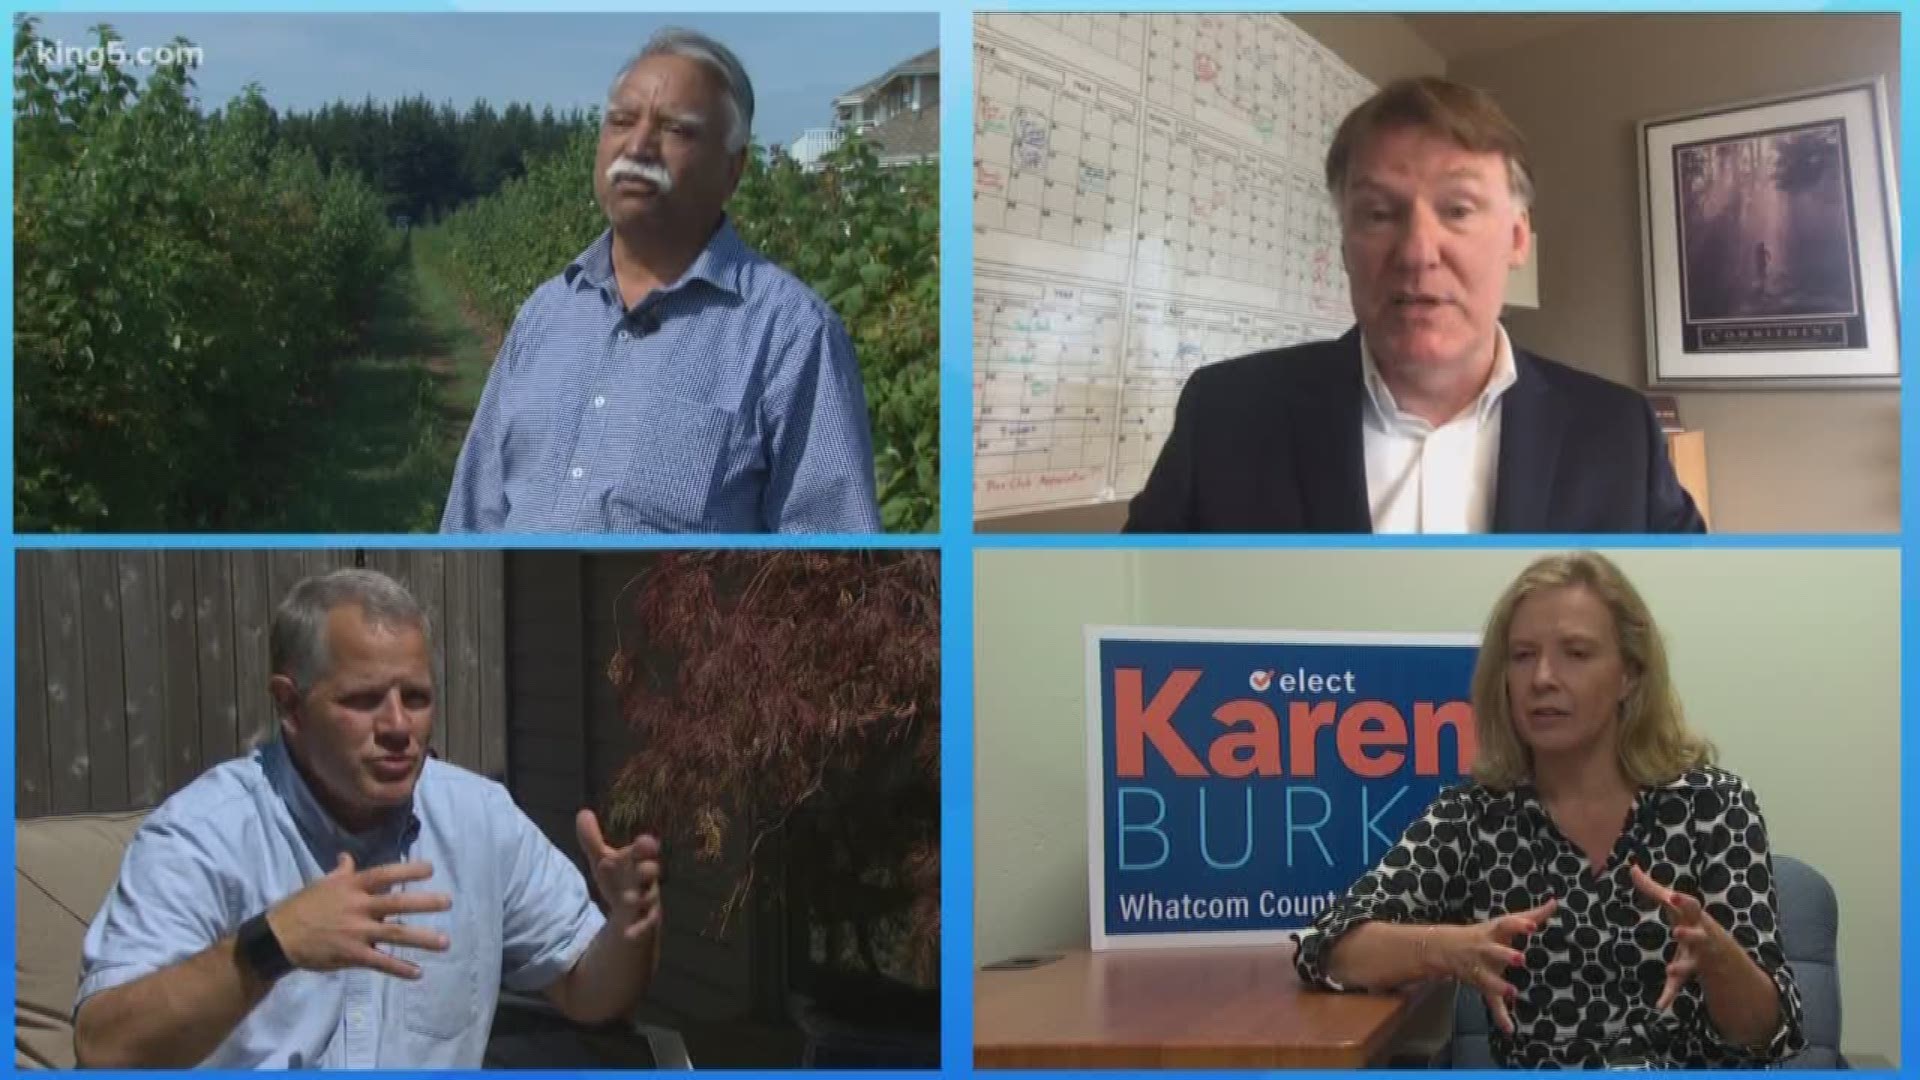 The high paying and high-powered position of Whatcom County executive has brought out a deep field of candidates.